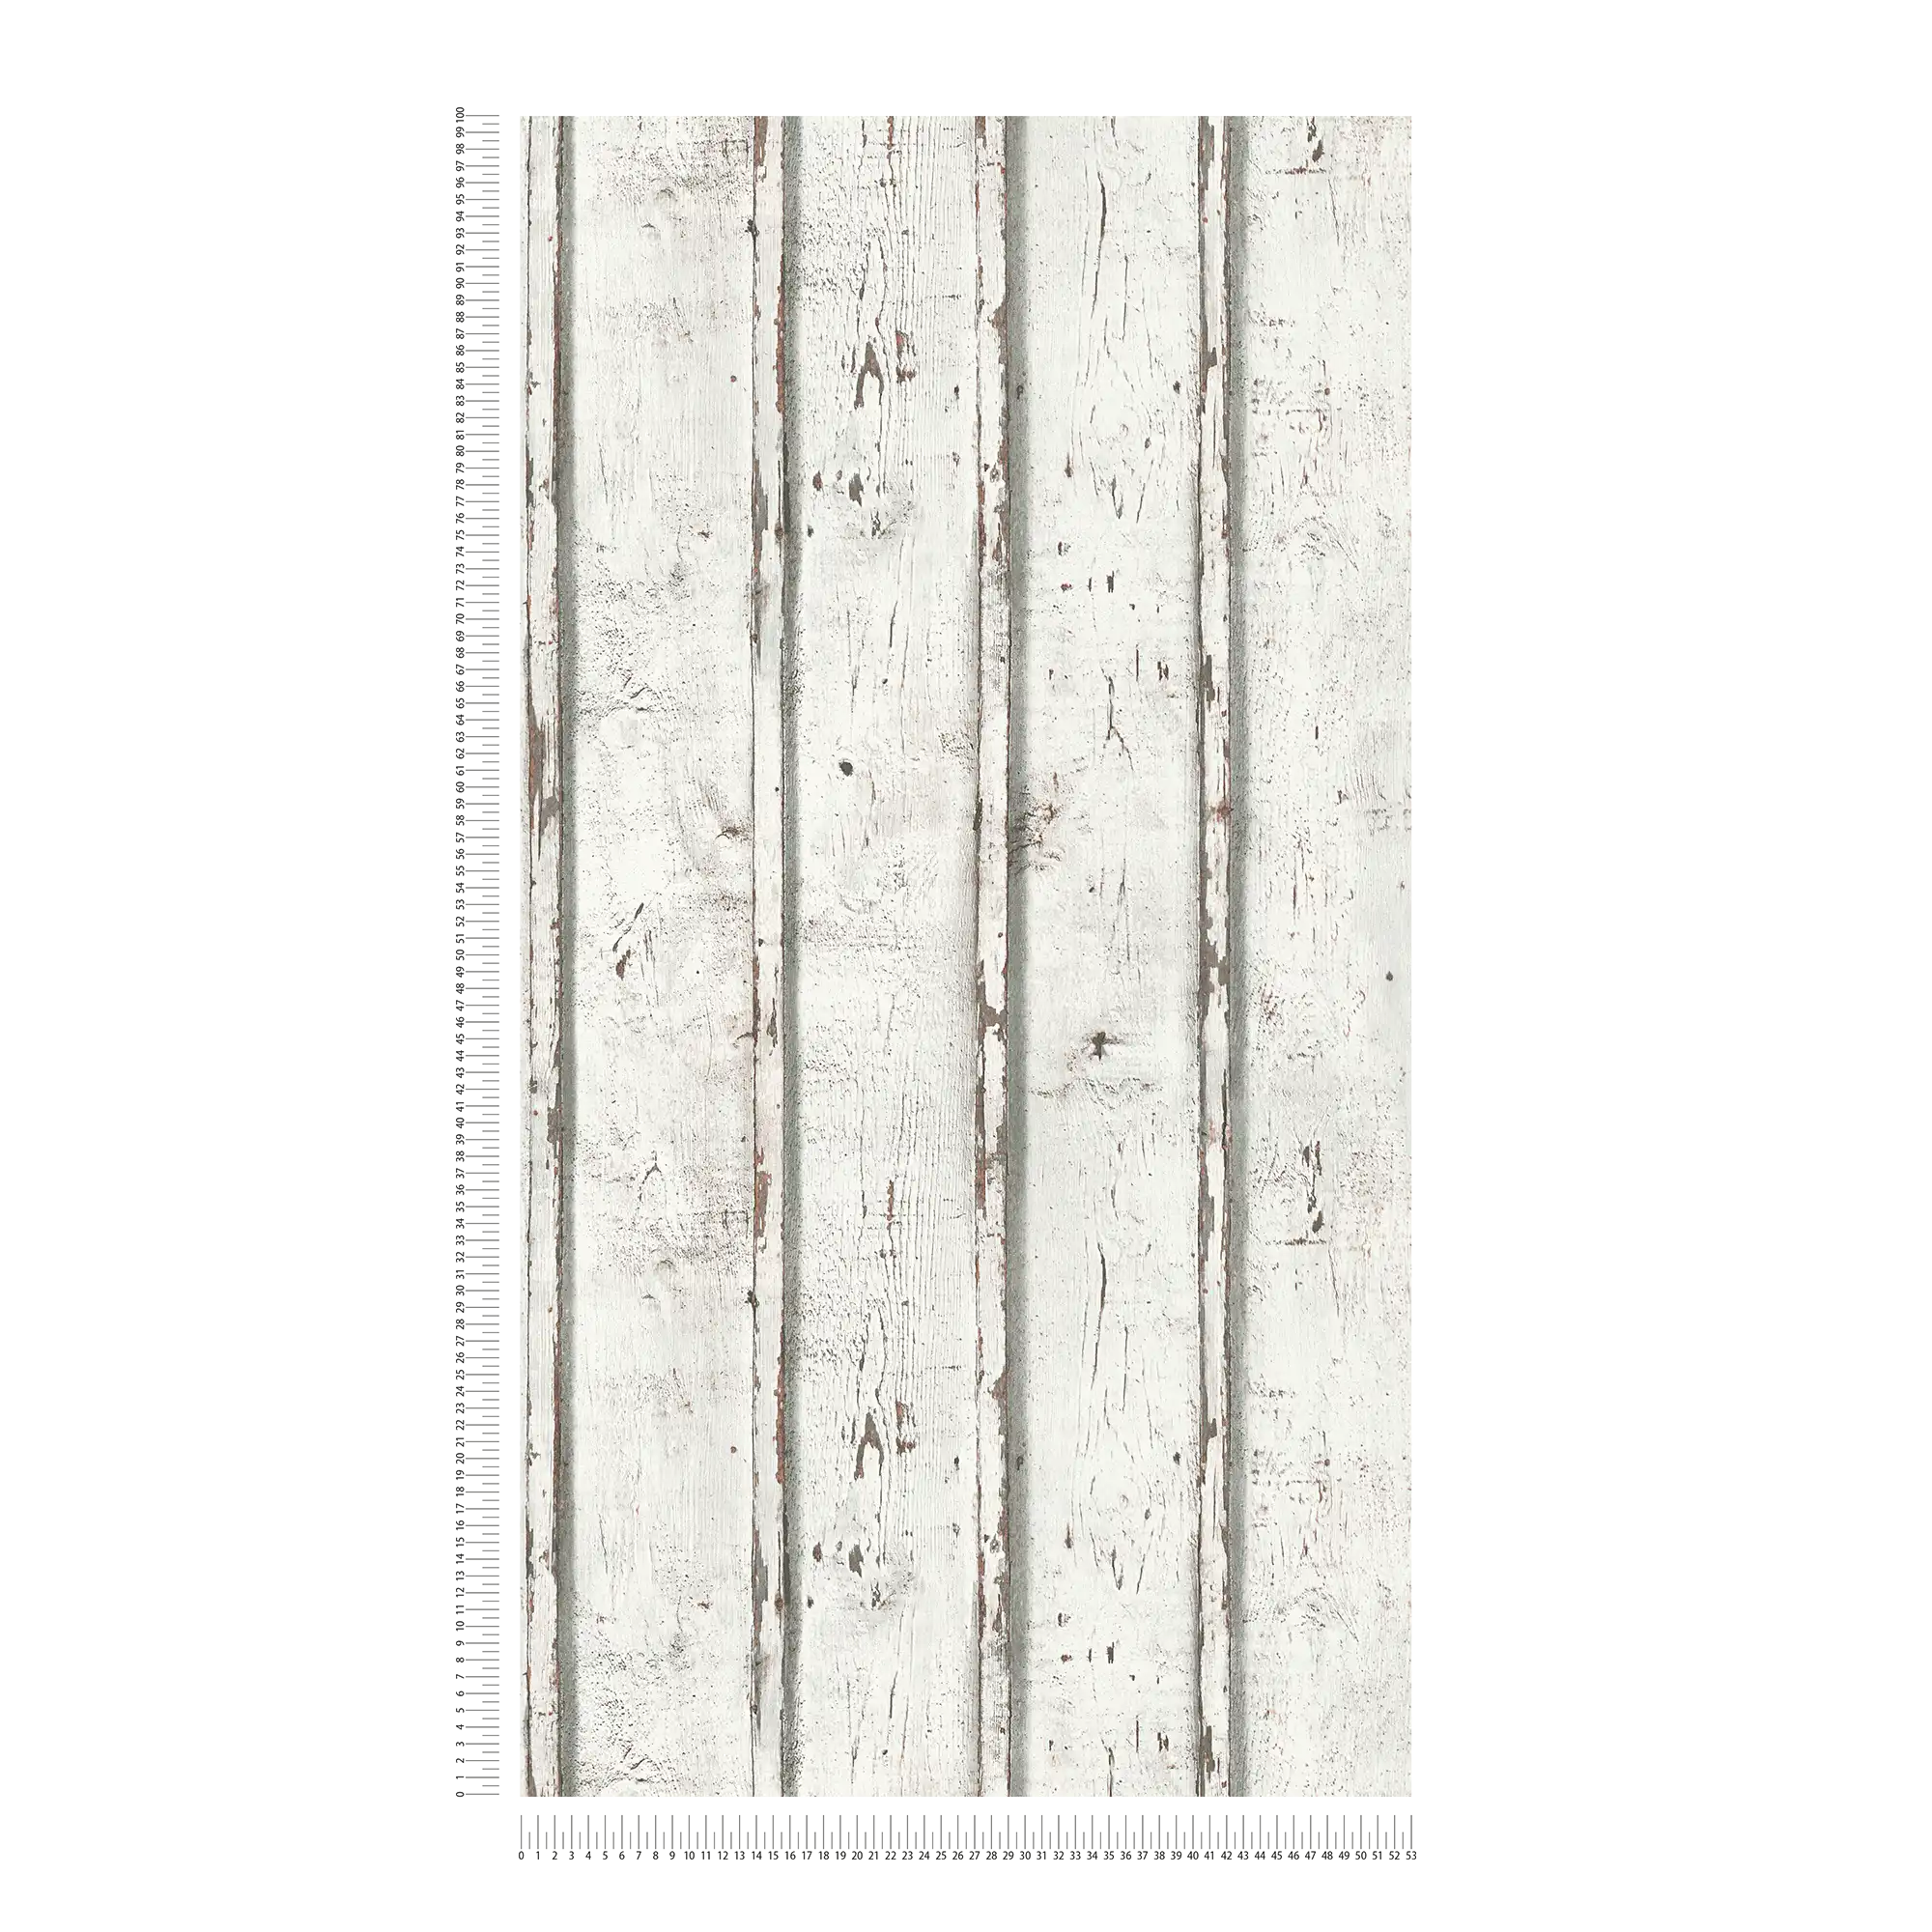             Wooden wallpaper in used look with weathered wooden boards - white, cream, grey
        